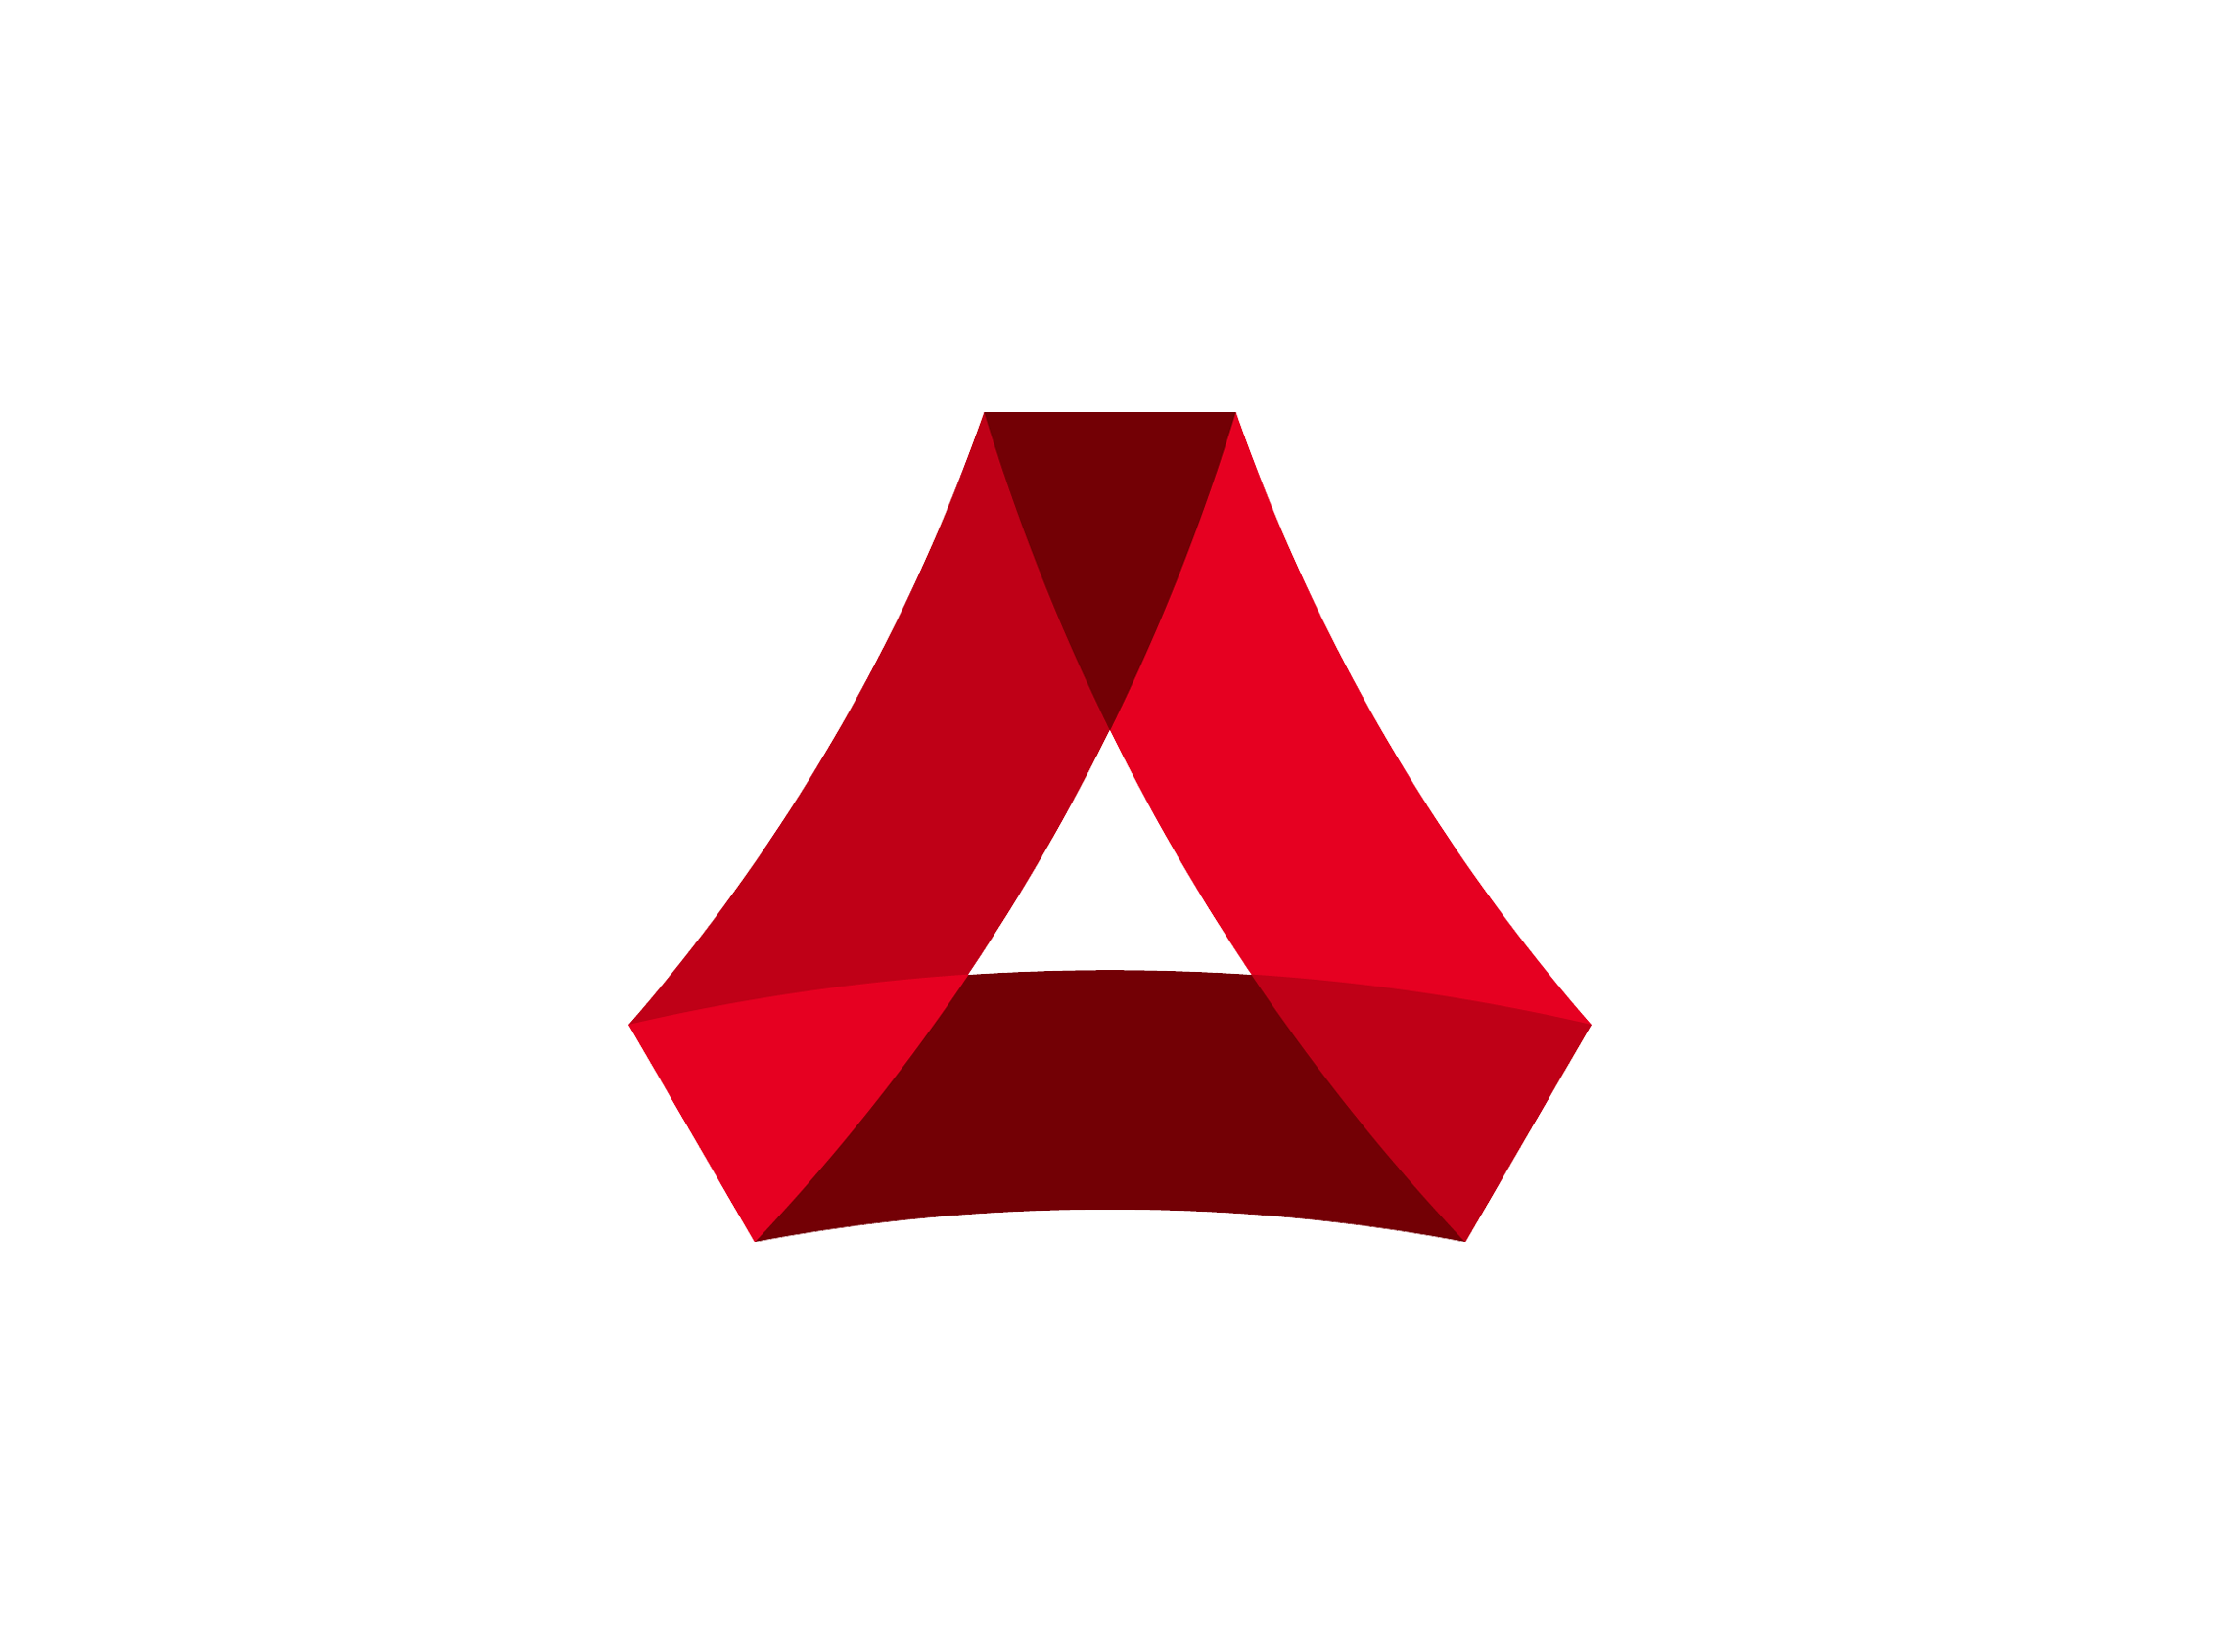 Red Triangle with Kangaroo Logo - Red and white triangle Logos